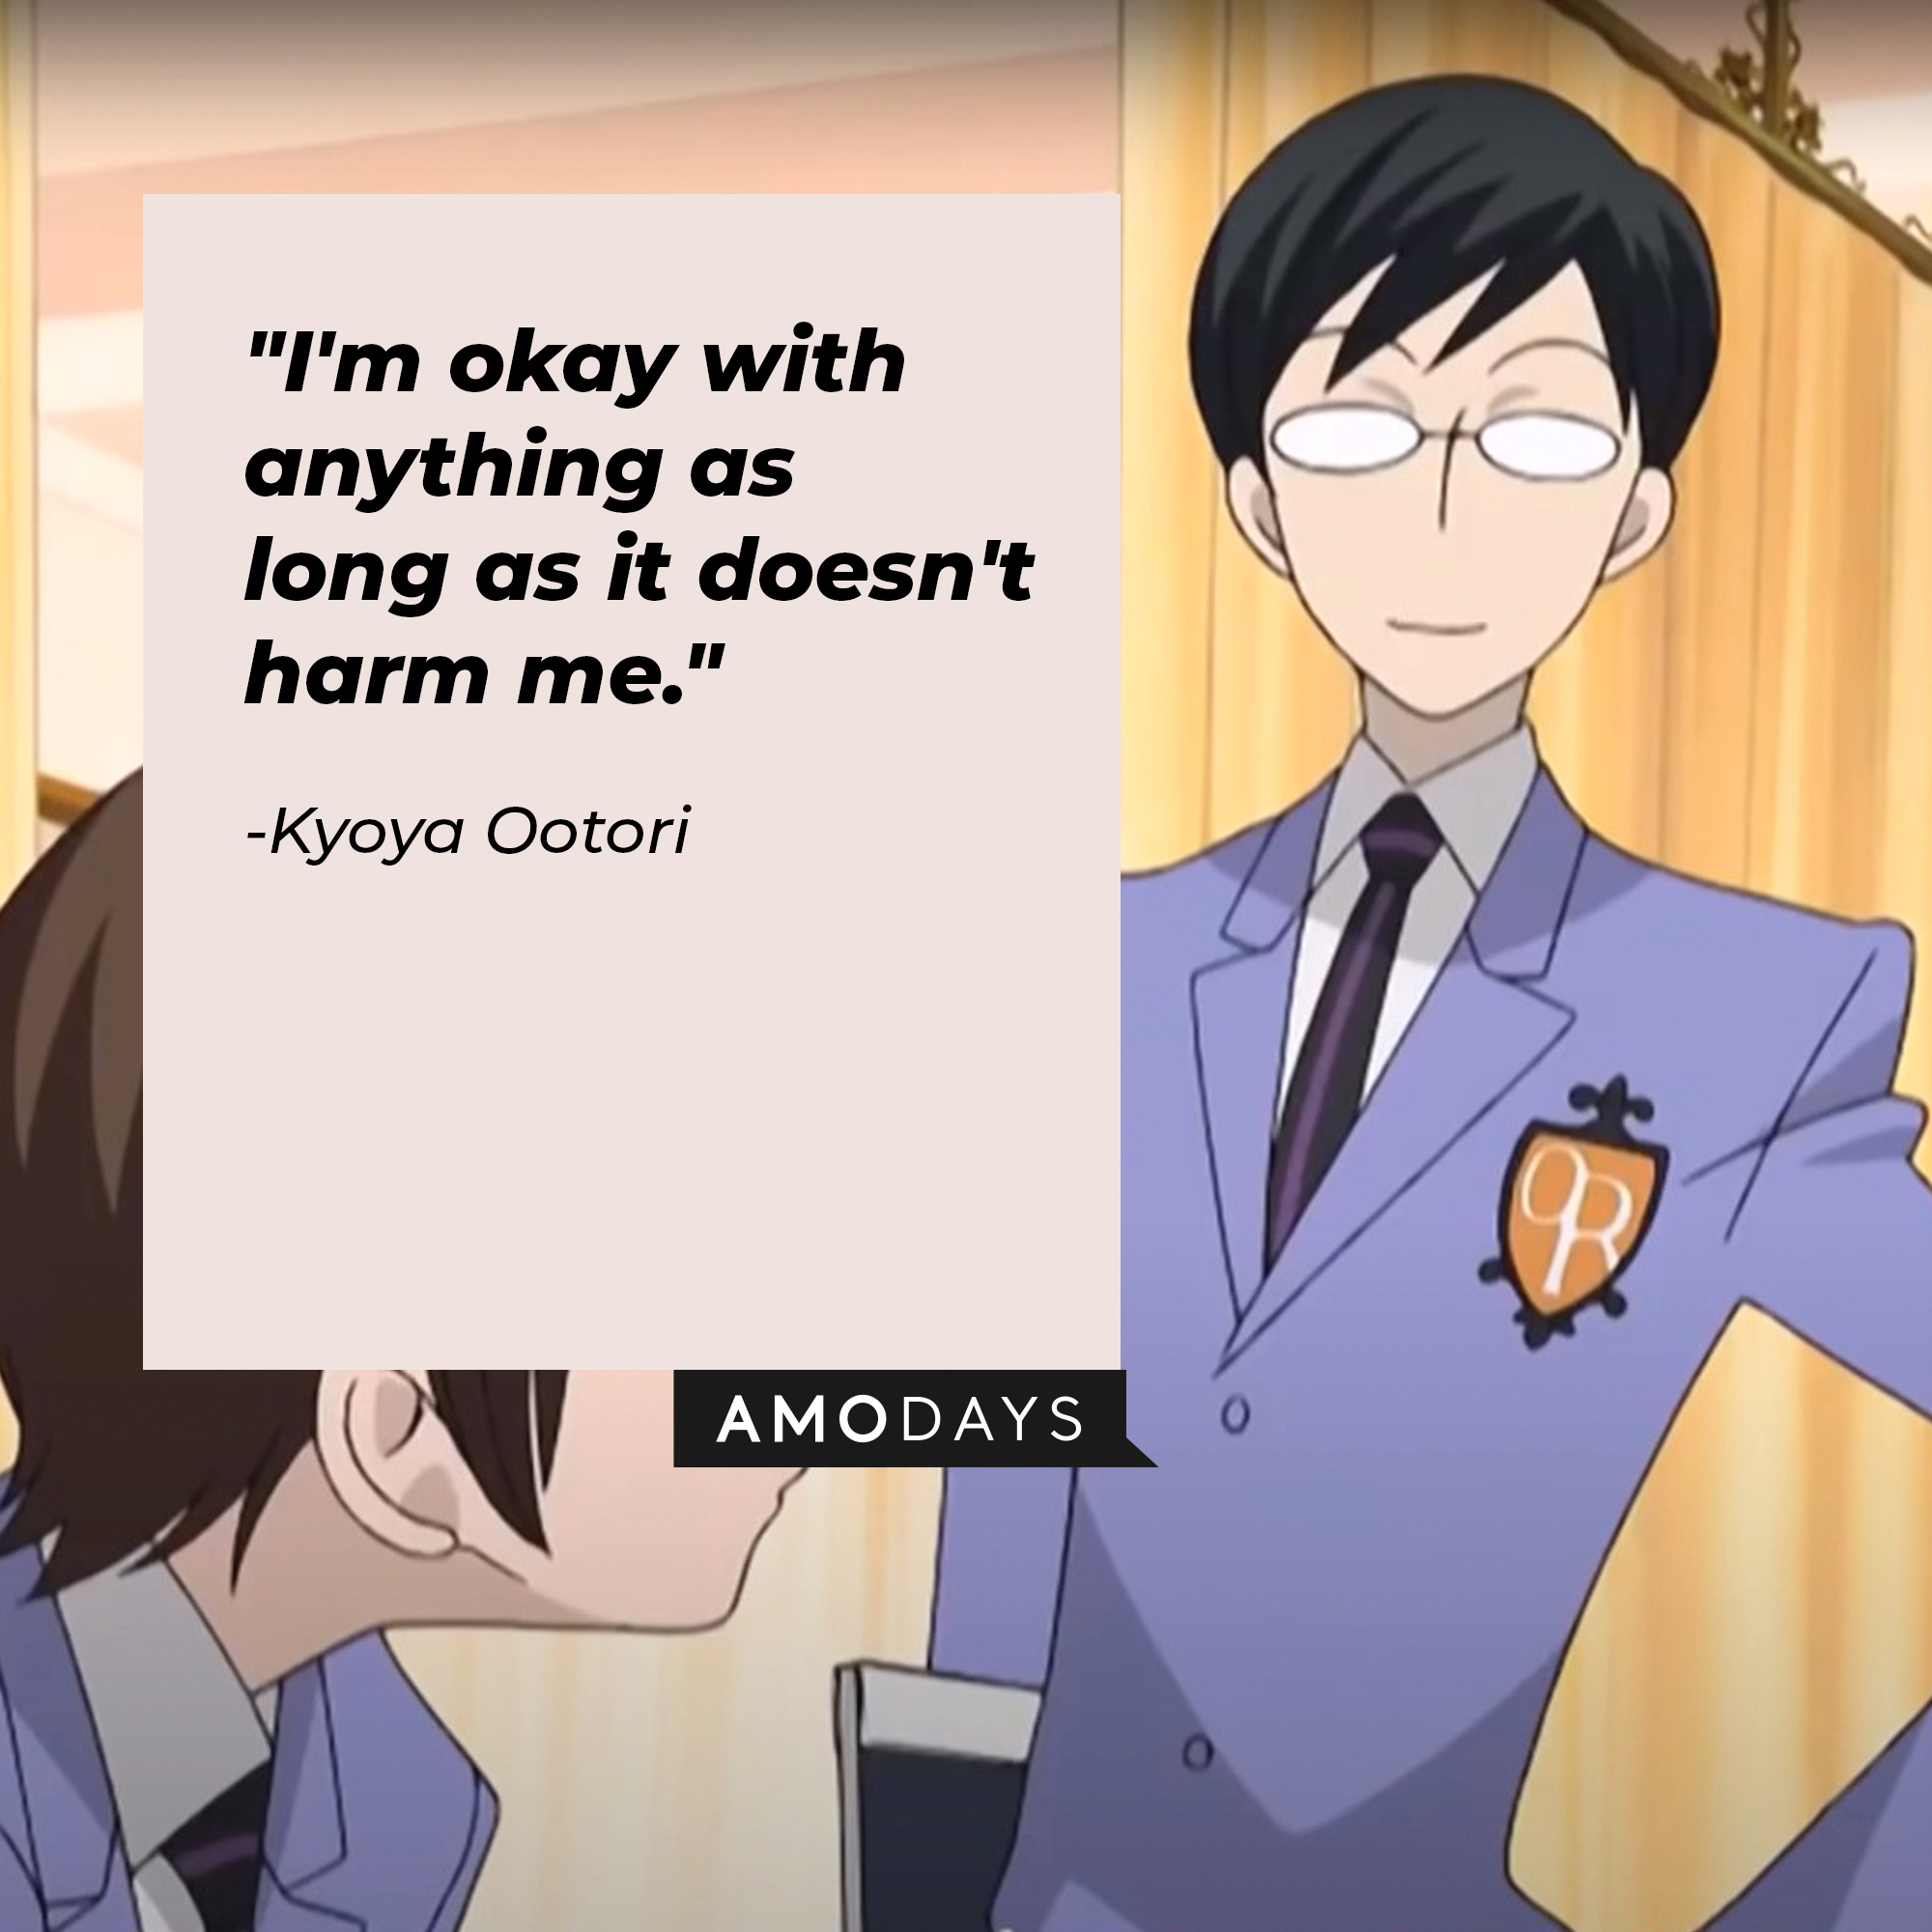 Kyoya Ootori's quote: "I'm okay with anything as long as it doesn't harm me." | Source: Facebook.com/theouranhostclub